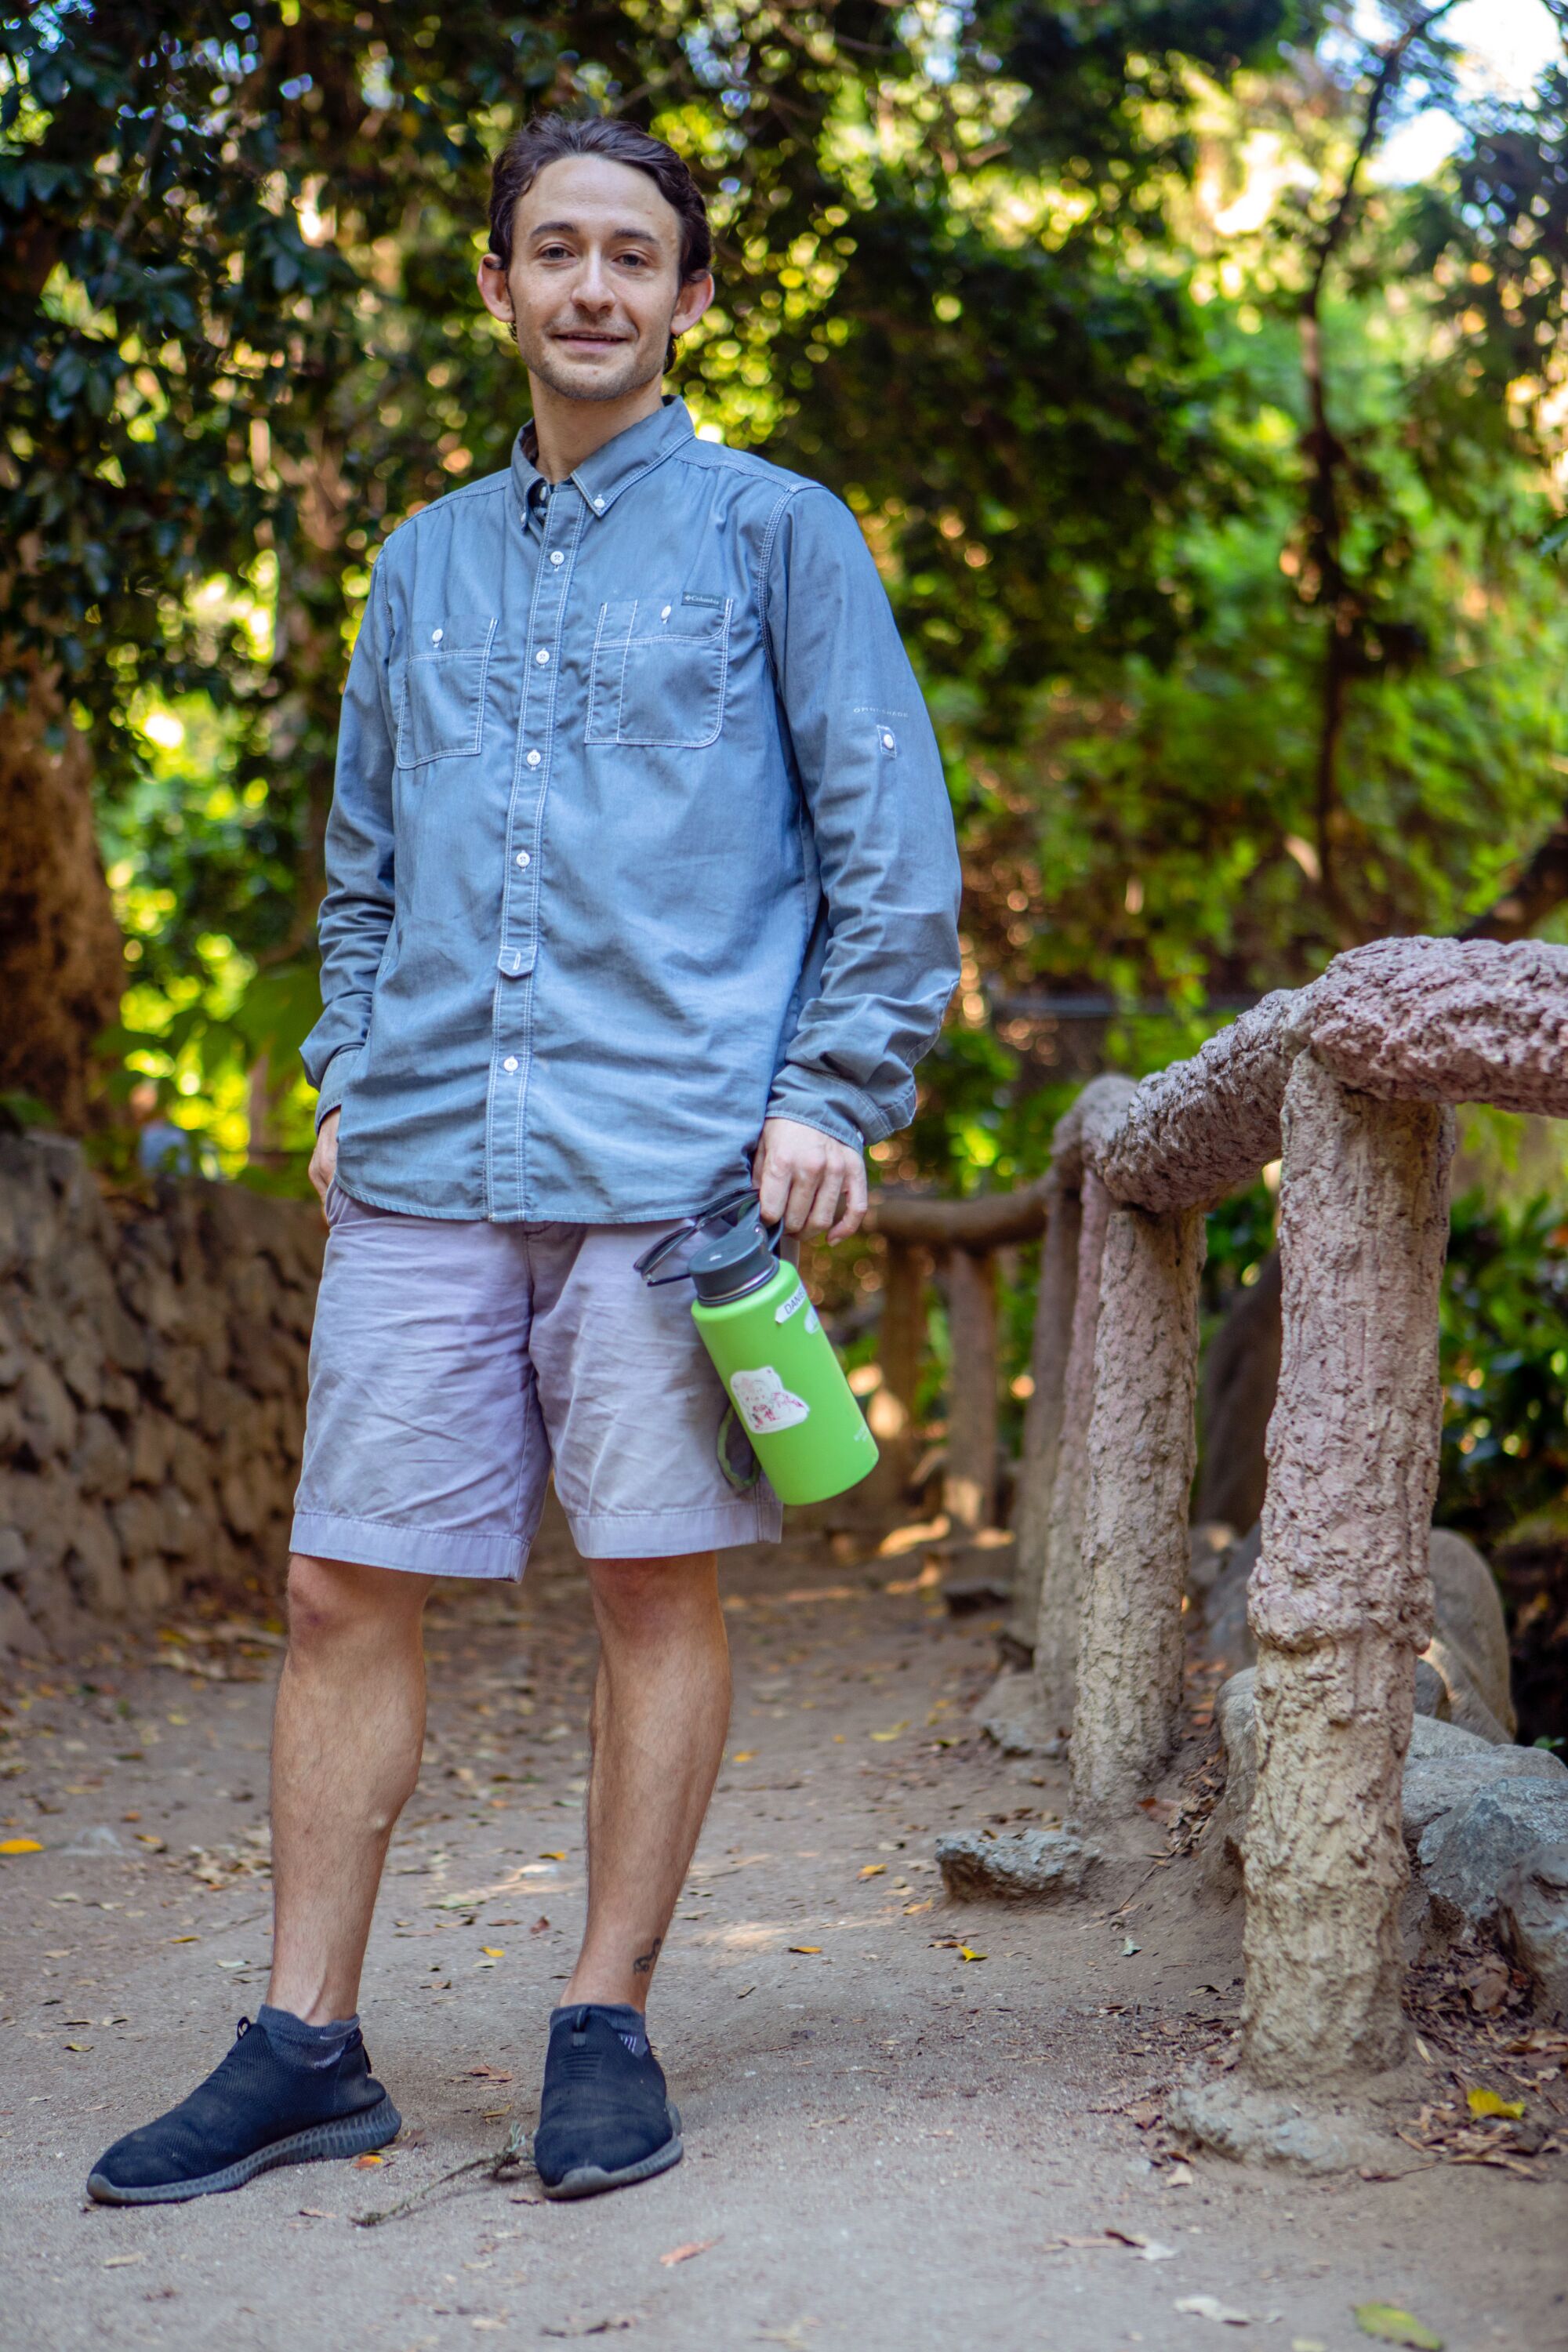 Man in shorts and a hiking shirt stands outside and holds a green water bottle